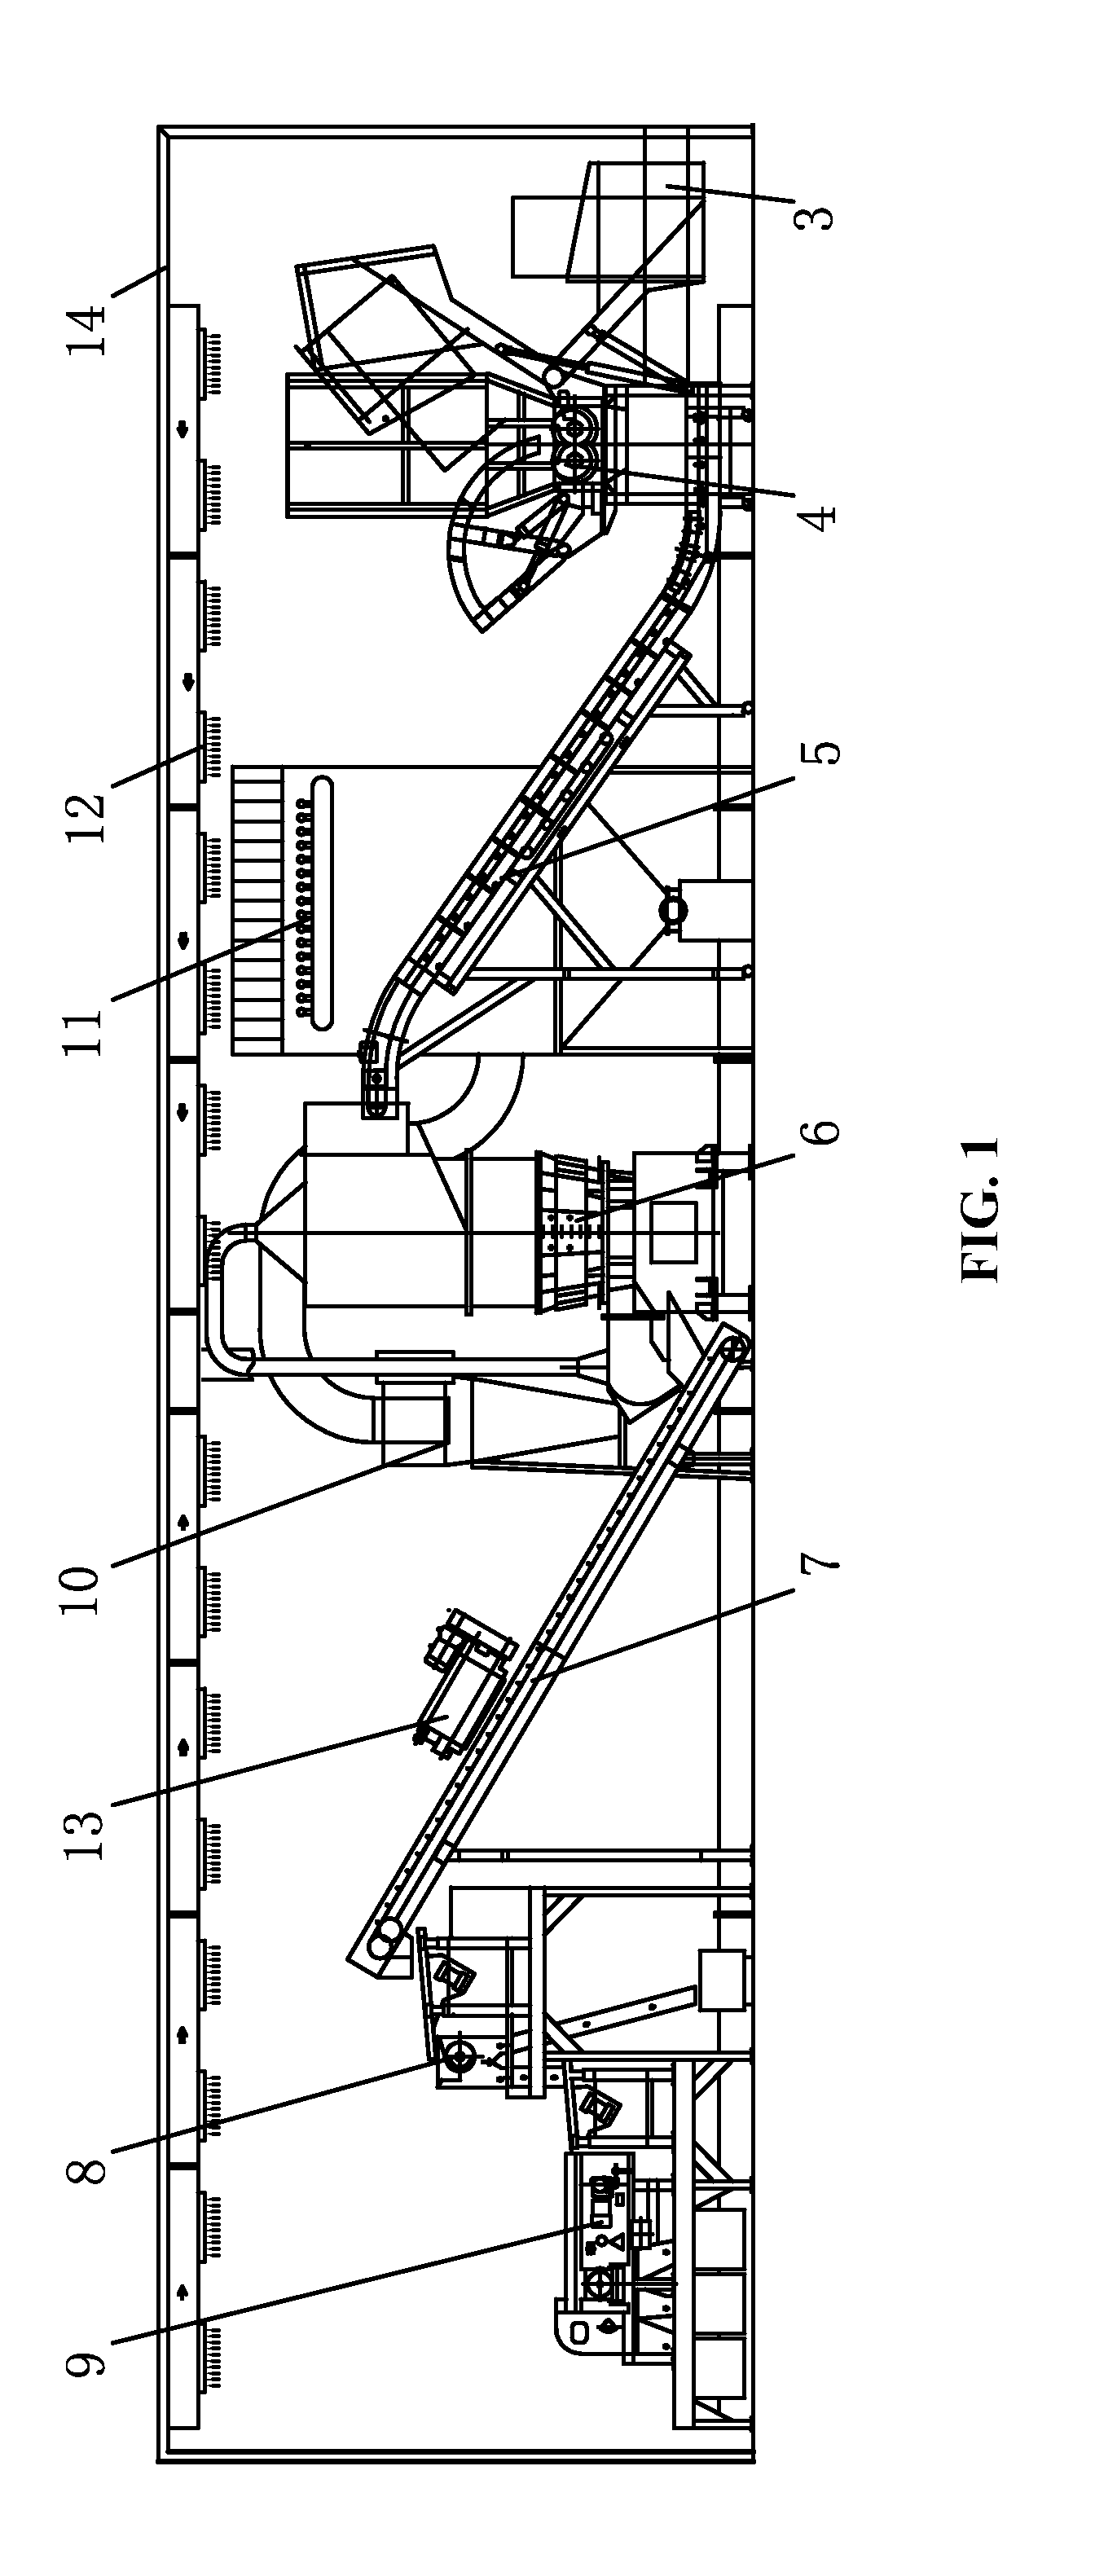 Method and device for treatment and recycling of waste refrigerators